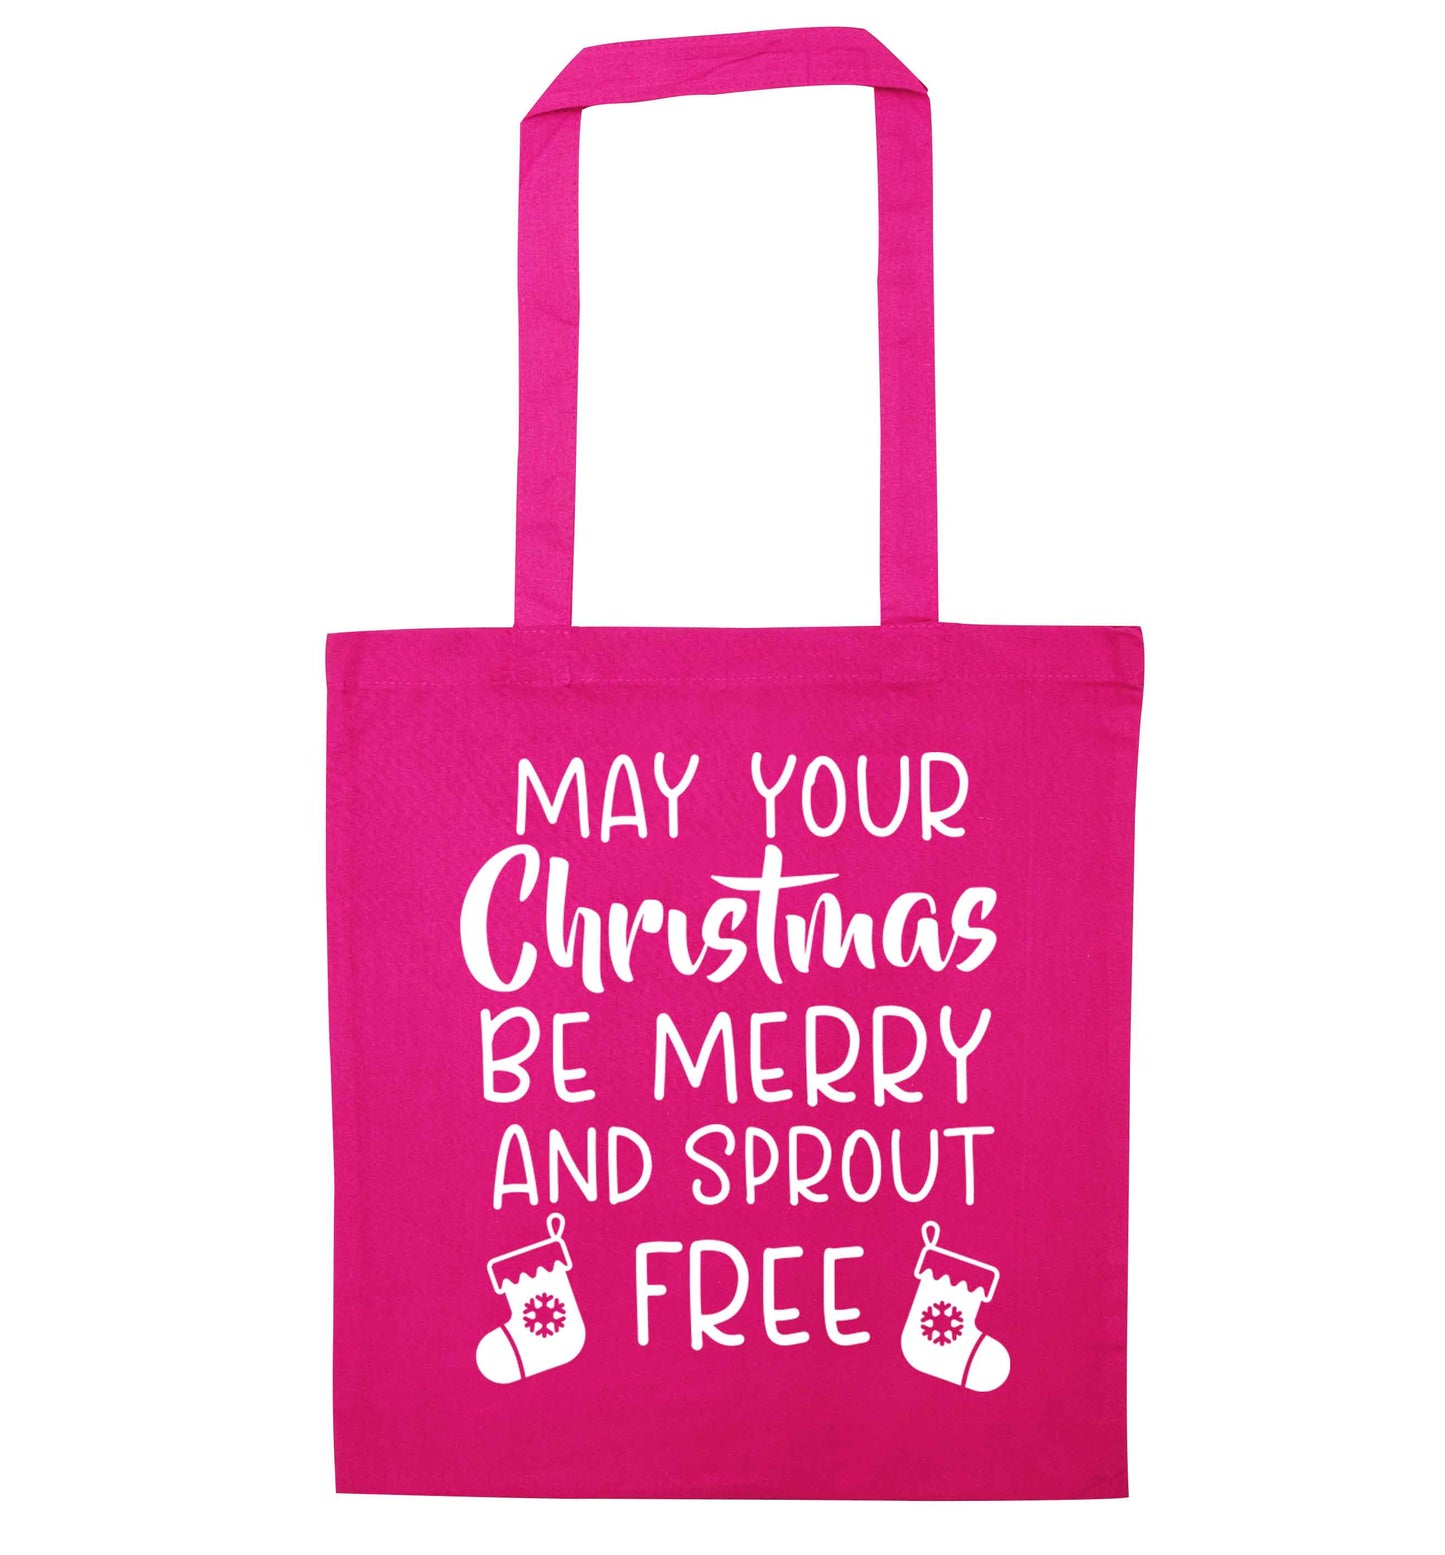 May your Christmas be merry and sprout free pink tote bag